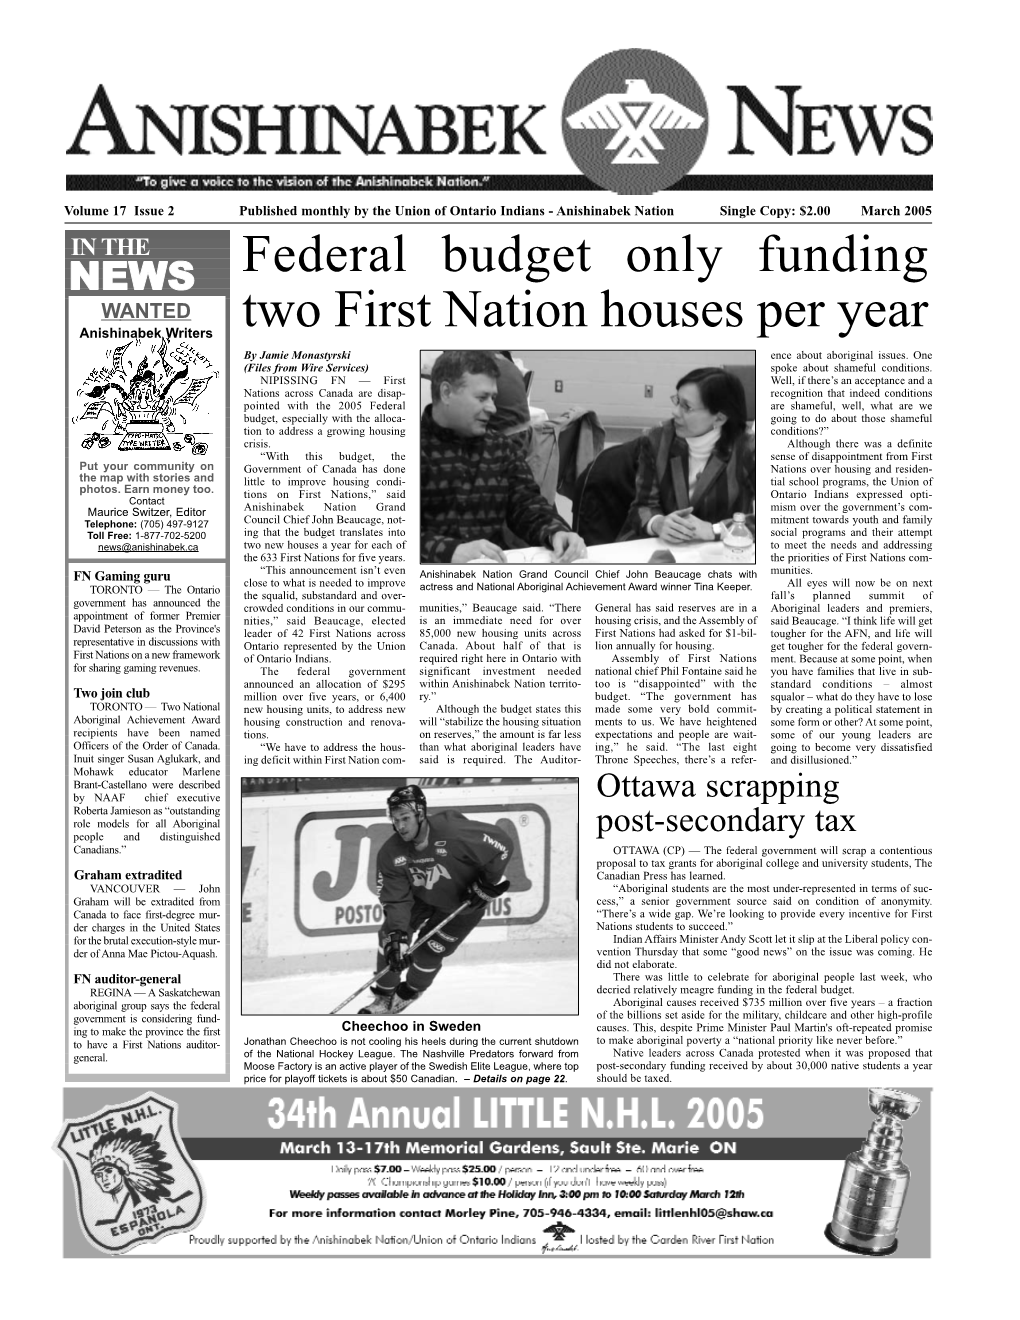 March 2005 in the NEWS Federal Budget Only Funding WANTED Two First Nation Houses Per Year Anishinabek Writers by Jamie Monastyrski Ence About Aboriginal Issues